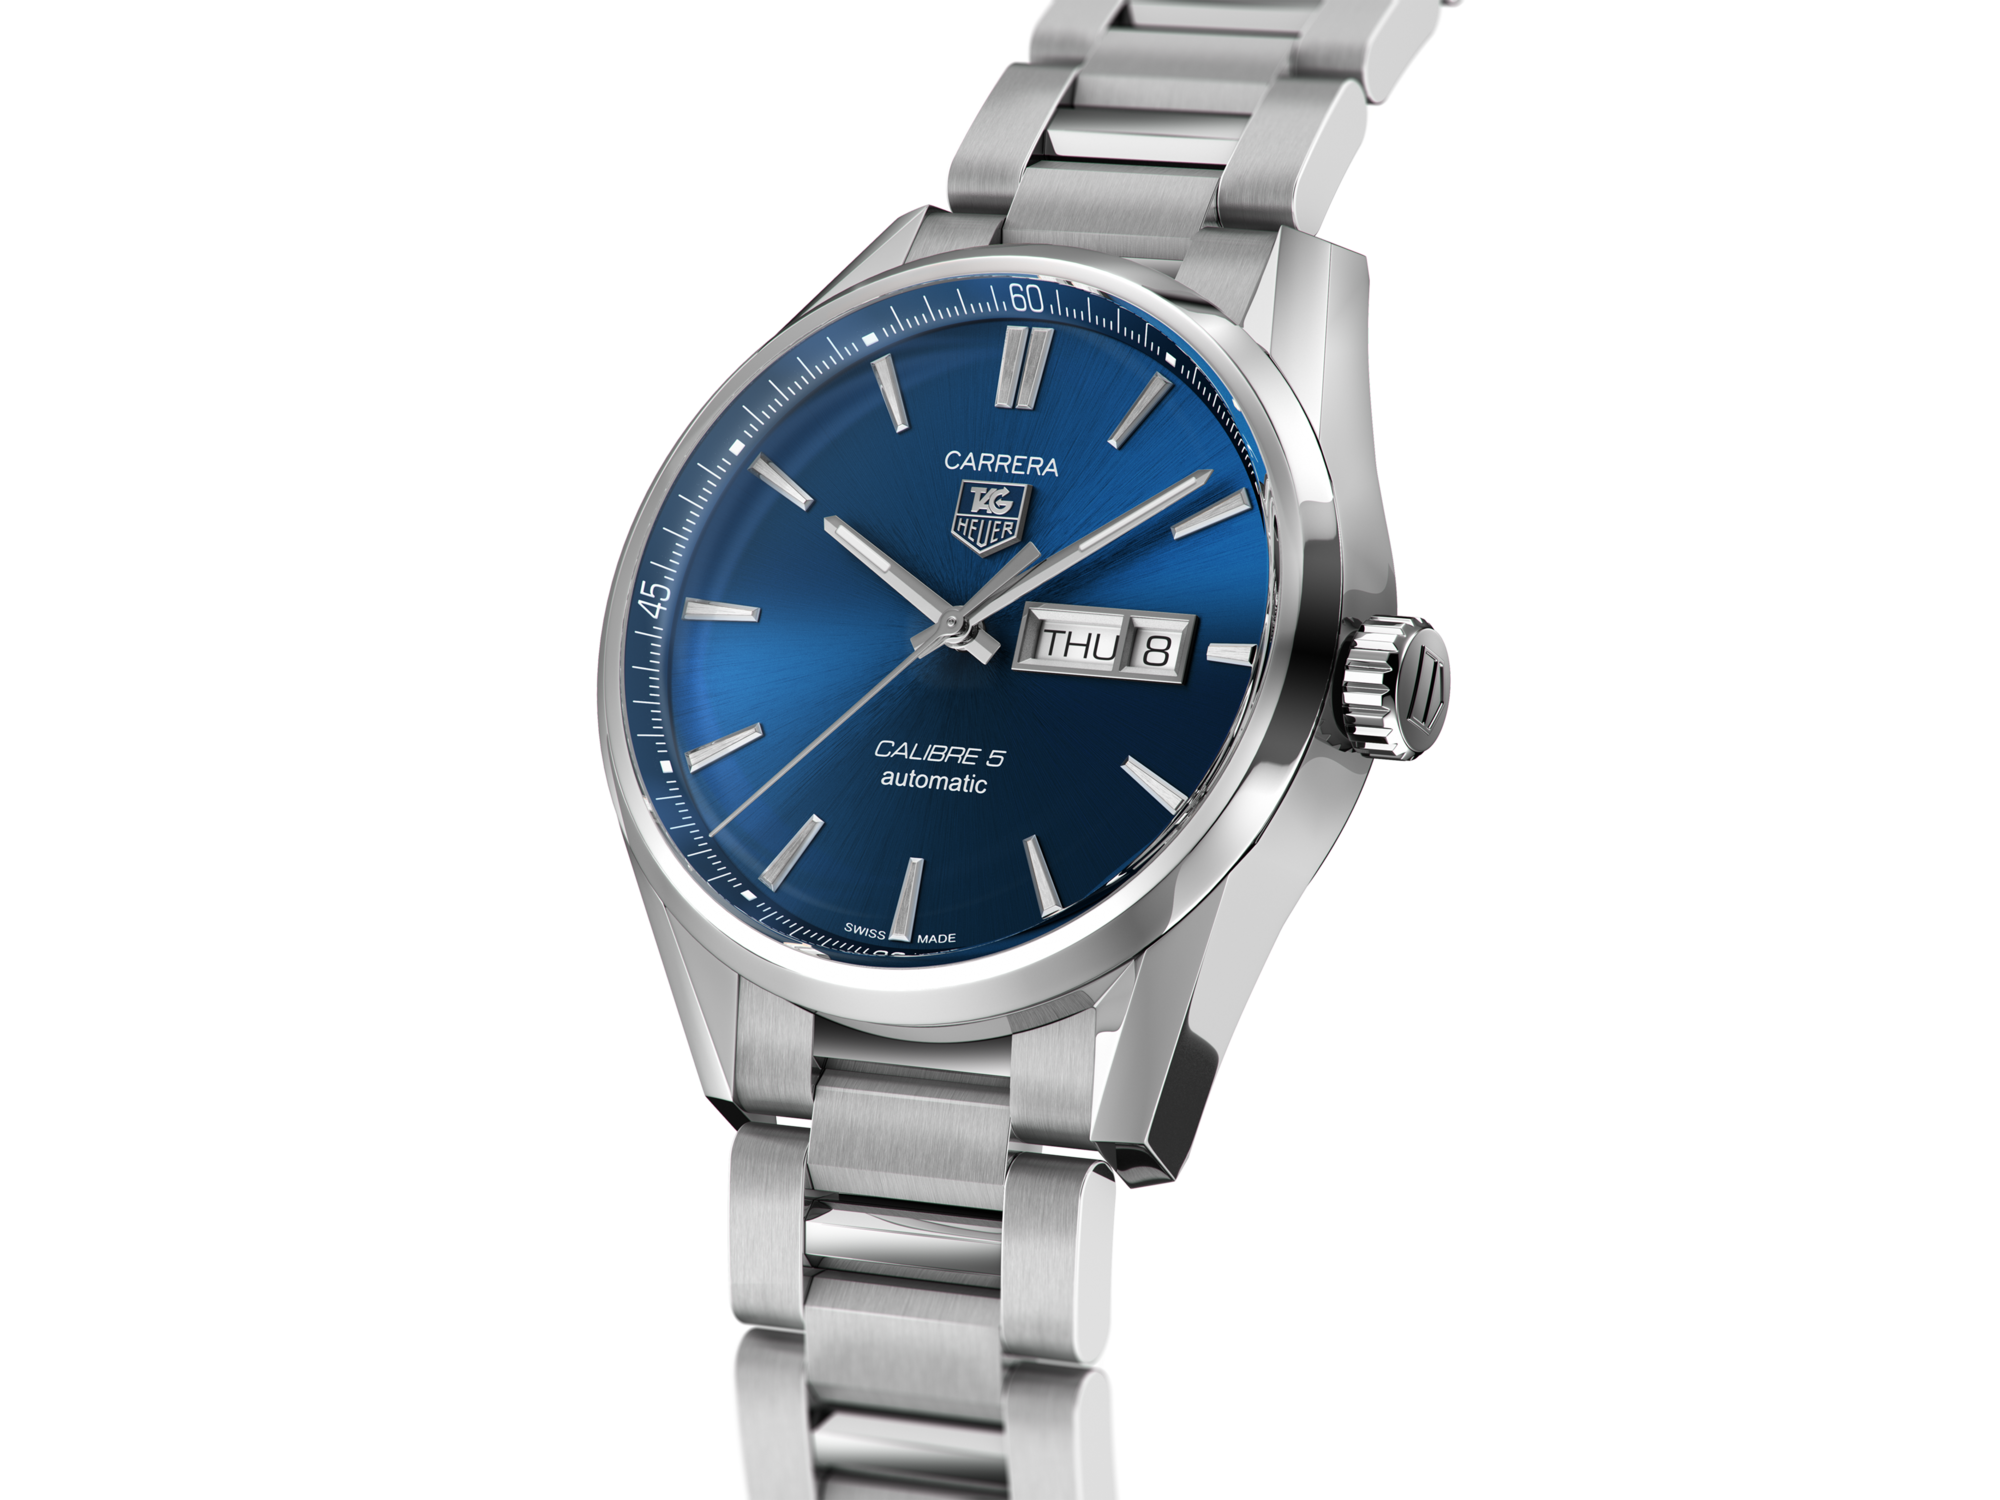 TAG Heuer Watches On Sale